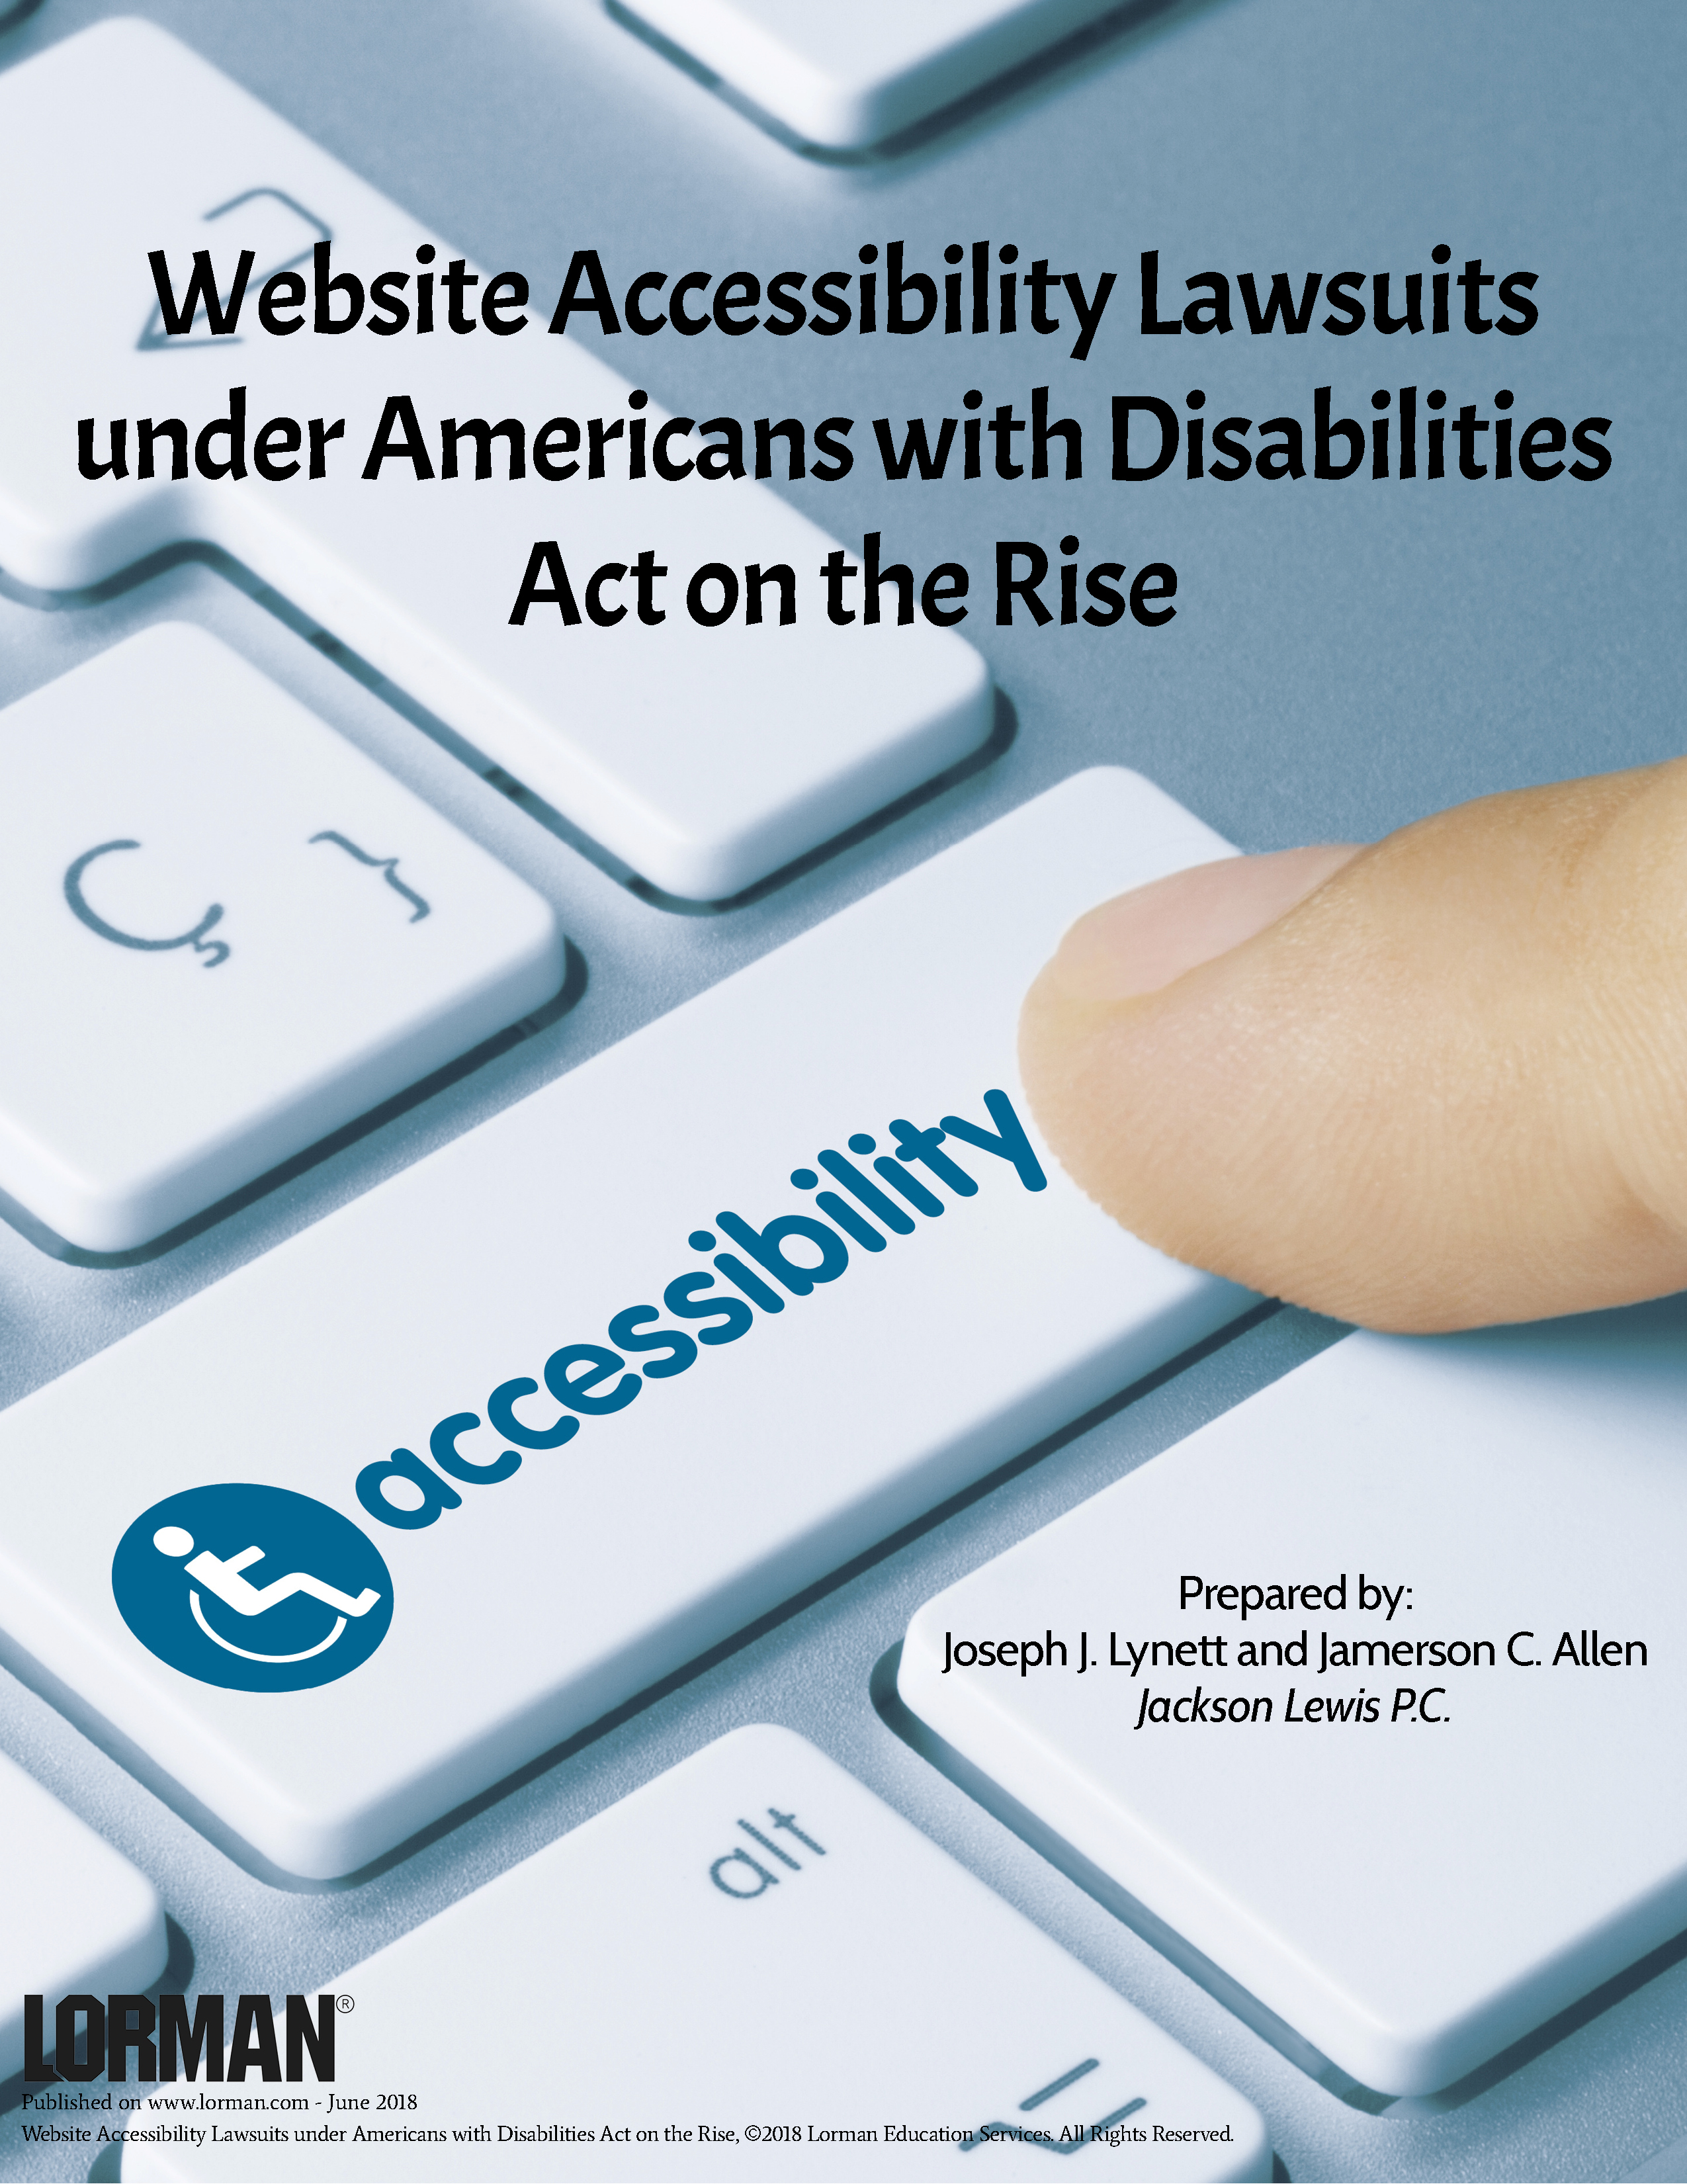 Website Accessibility Lawsuits under Americans with Disabilities Act on the Rise